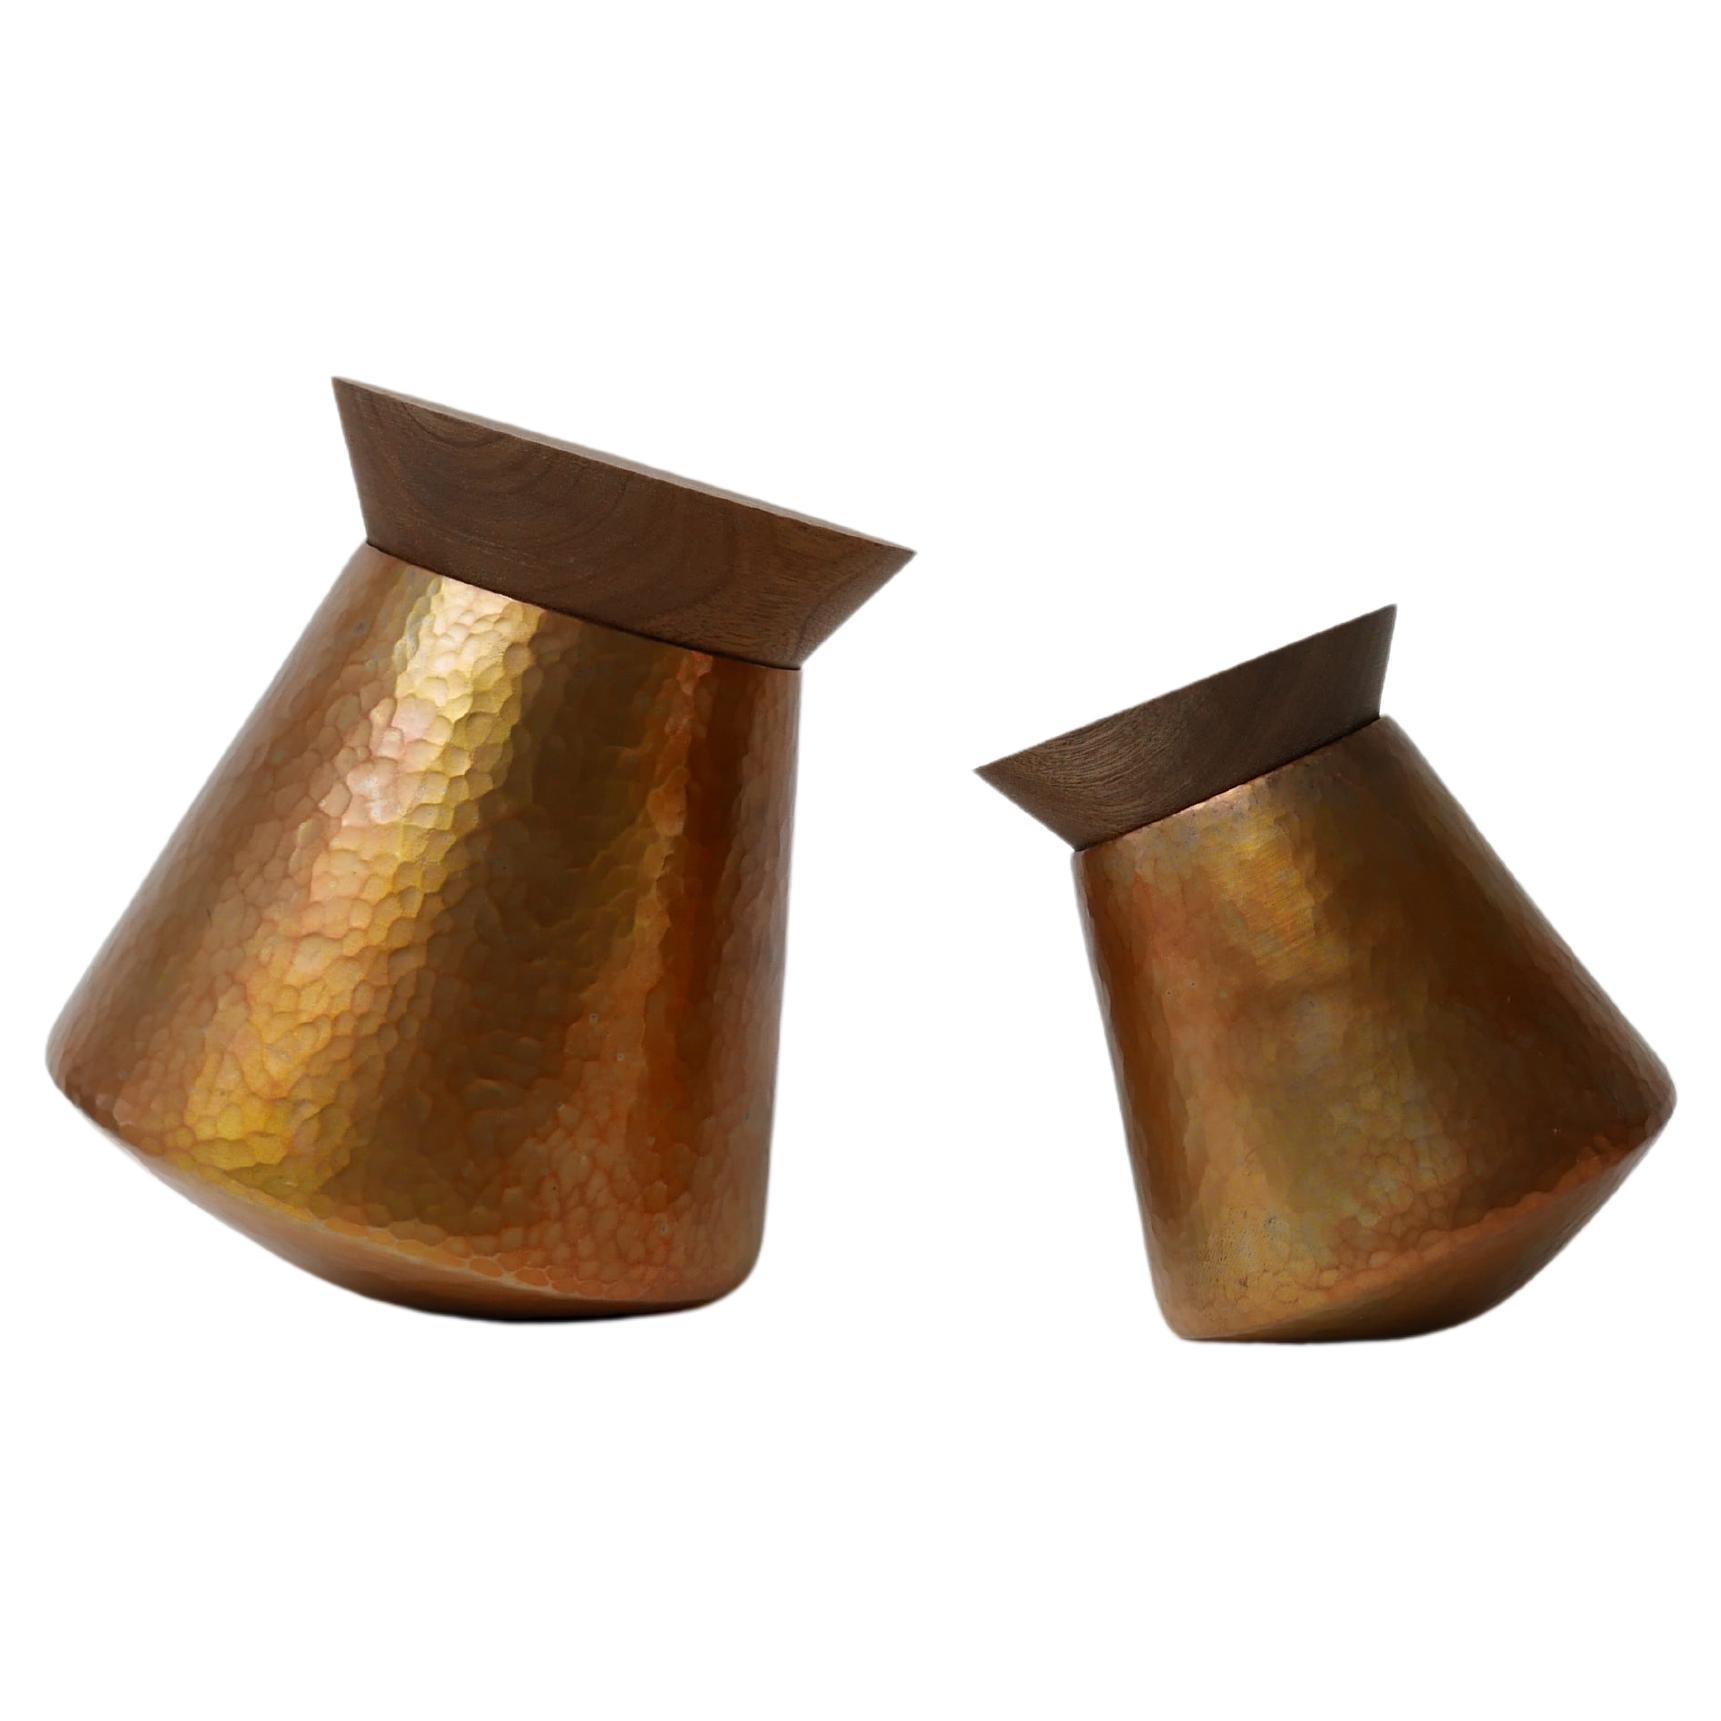 Set of Hammered Copper Containers with Brass Finish and Rosamorada Wood Lid